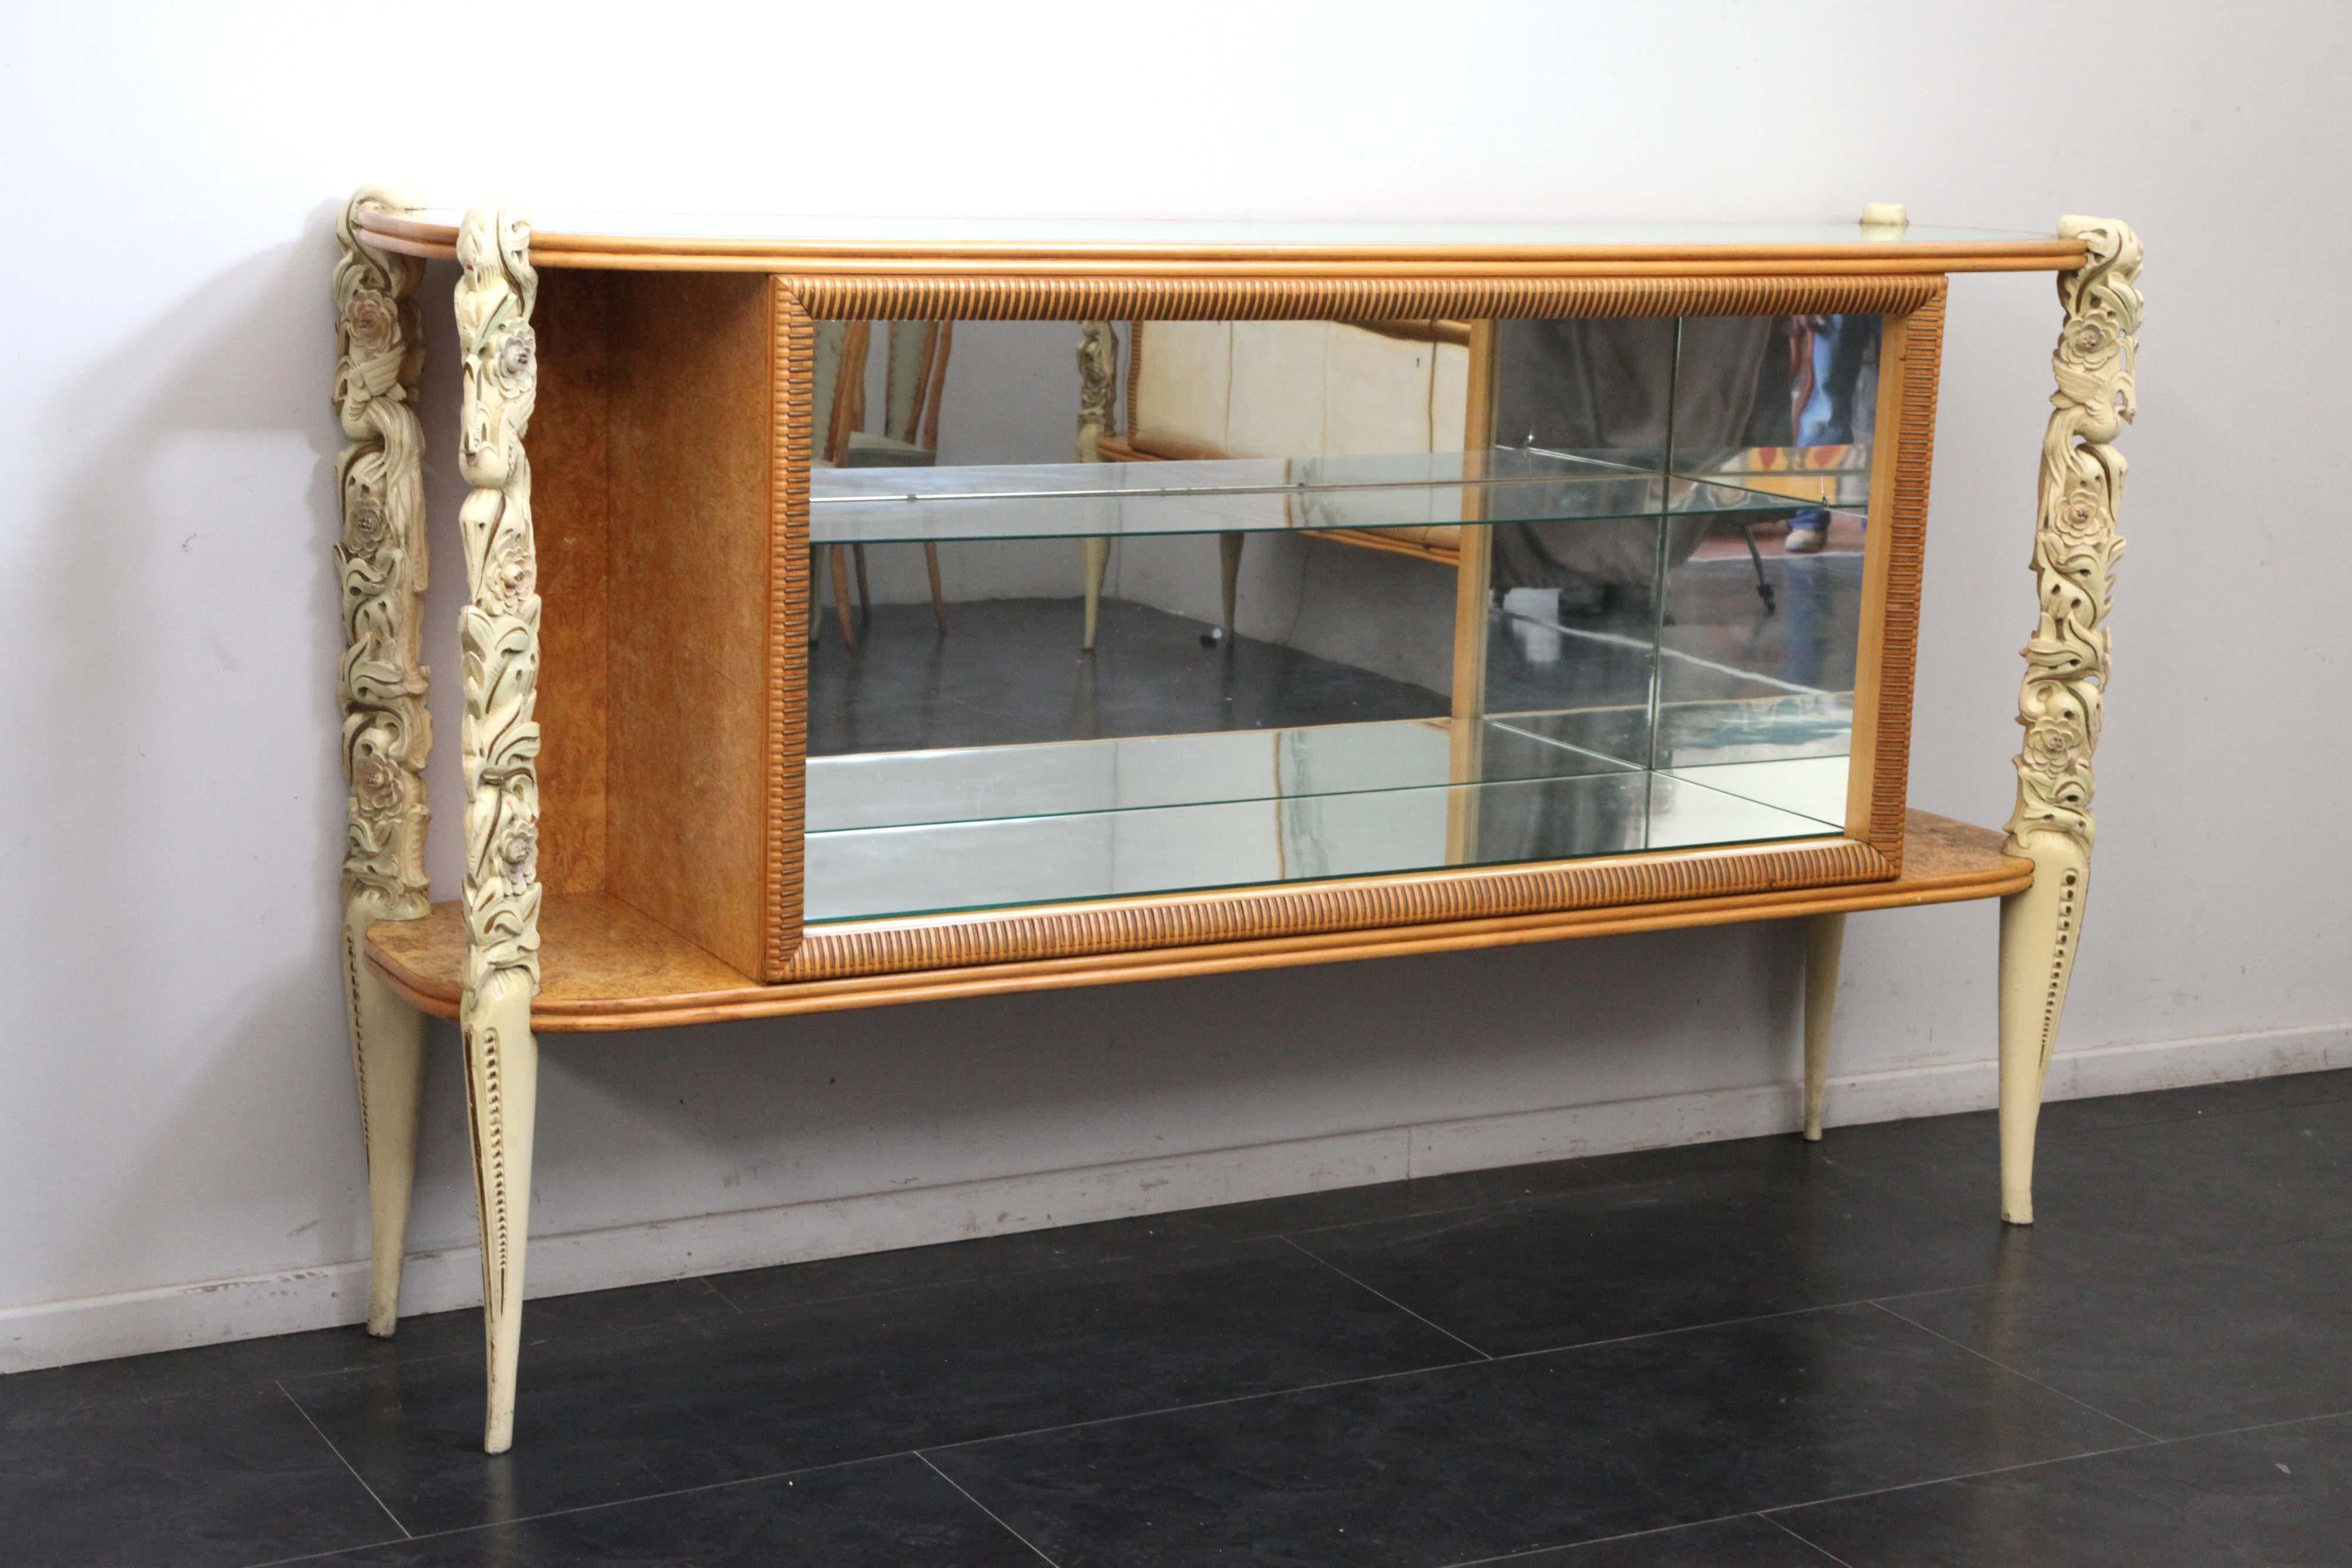 Display case designed with a shelf, missing closing glass, and La Permanente Cantù display case.